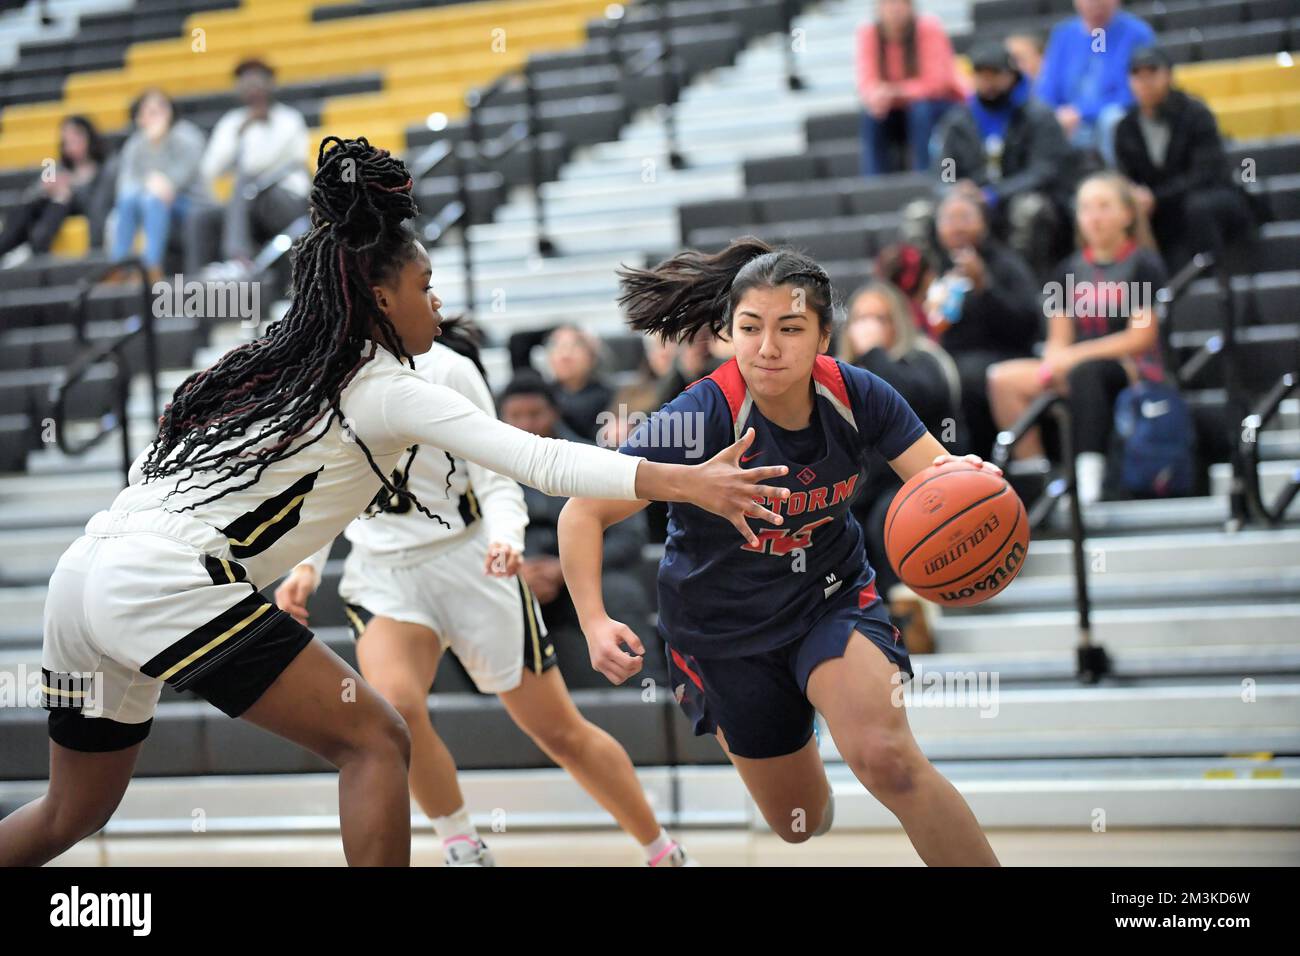 USA. Guard driving the baseline toward the basket while working to get past an opponent. Stock Photo